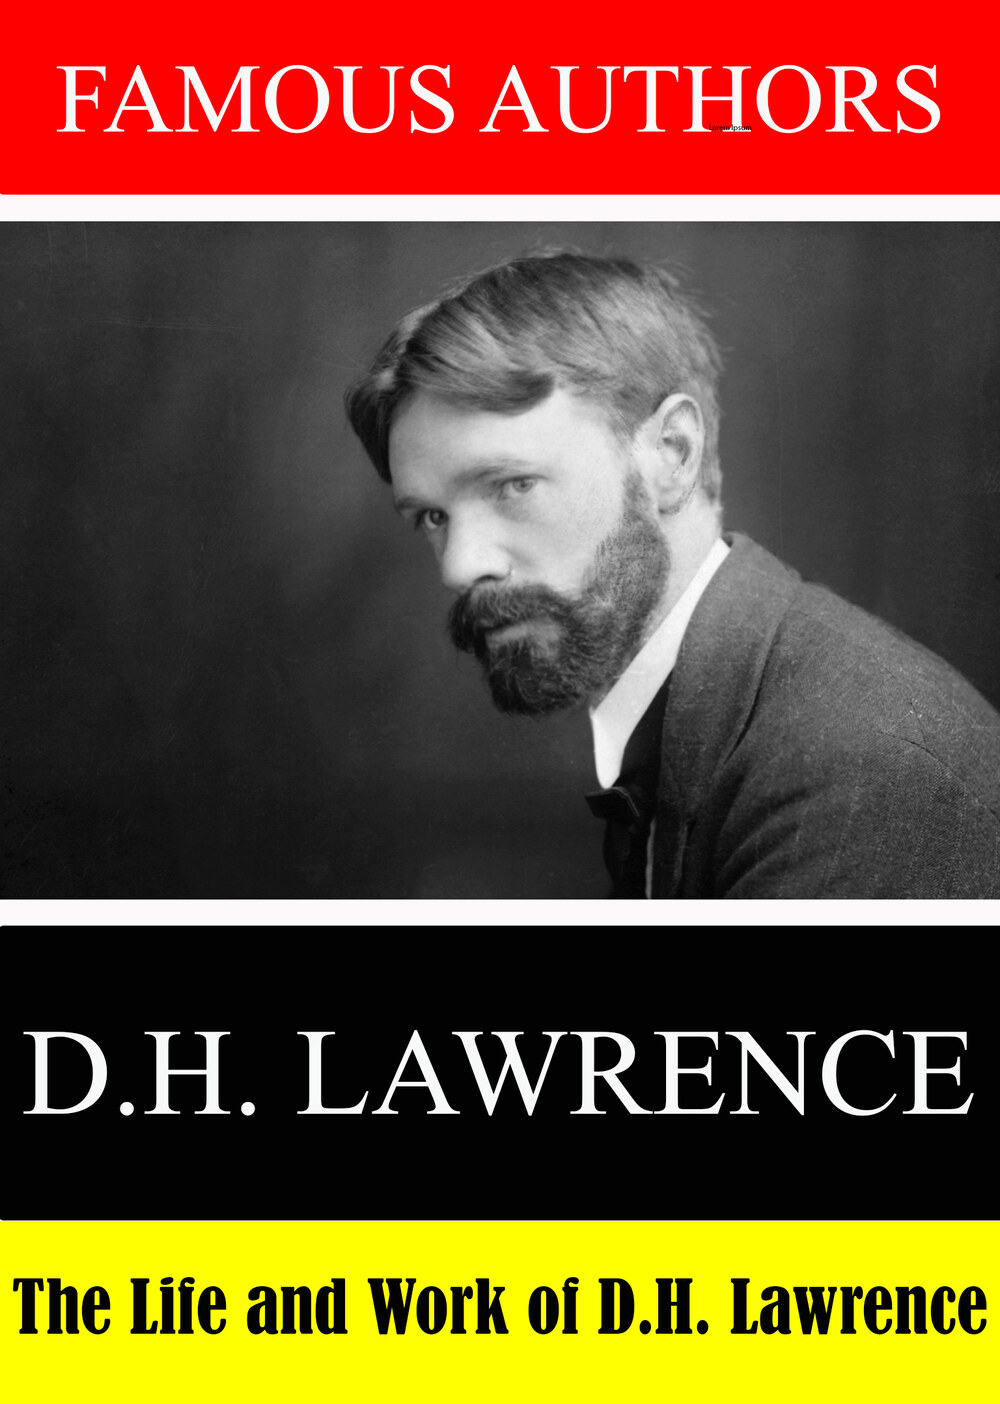 L7896 - Famous Authors:The Life and Work of D.H. Lawrence